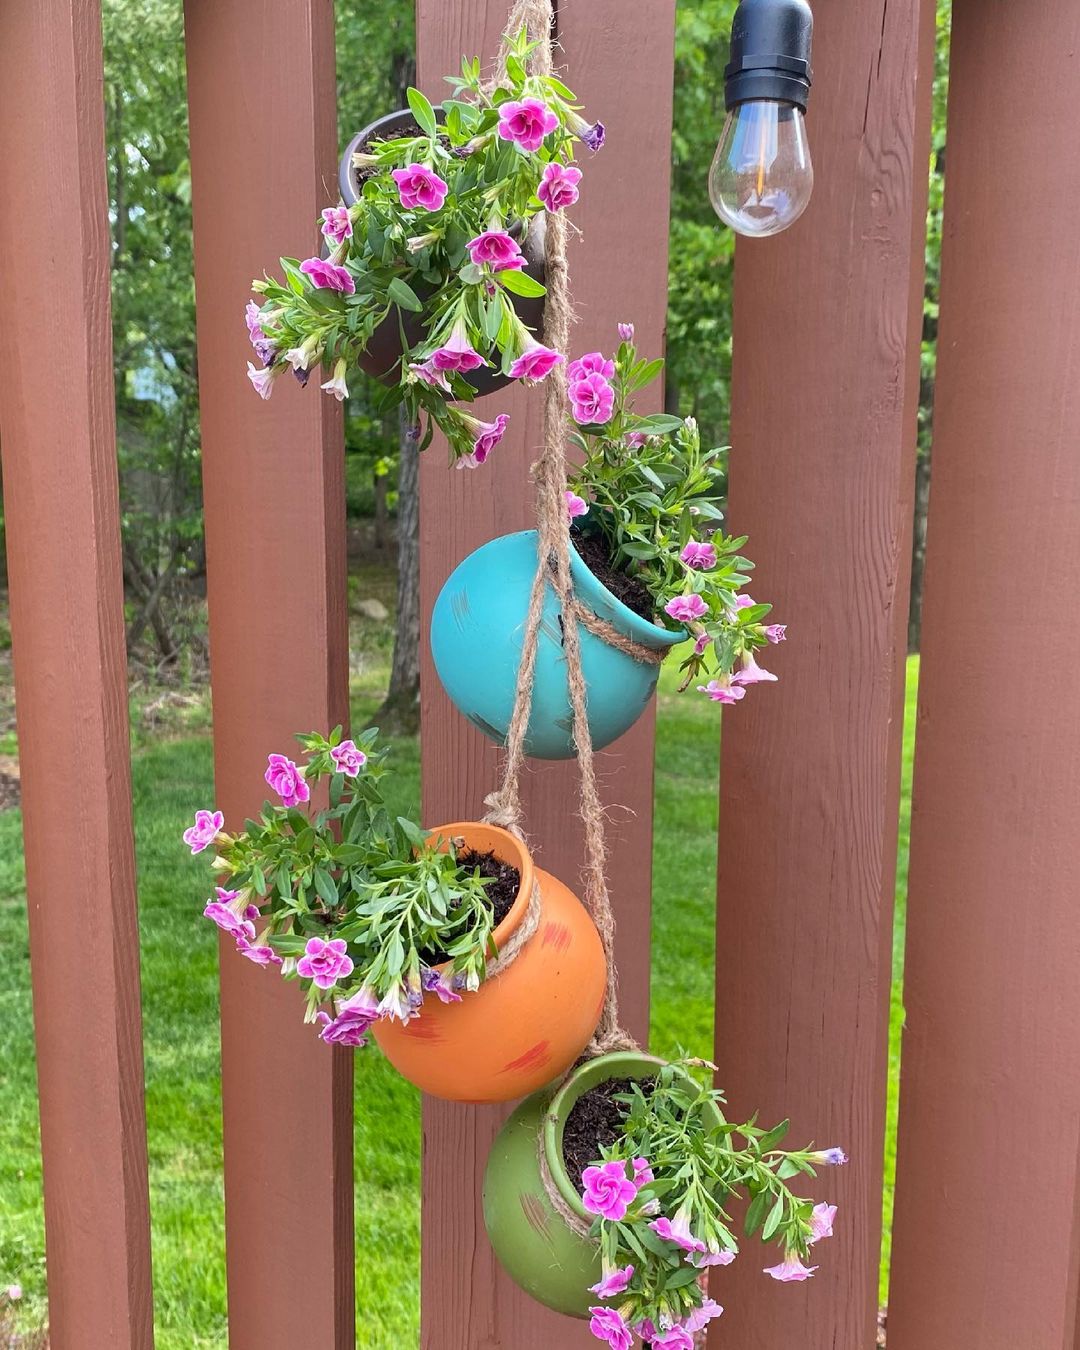 Painted potted plants hanging from a string against a fence with bright flowers inside. Photo by instagram user @garden_glo